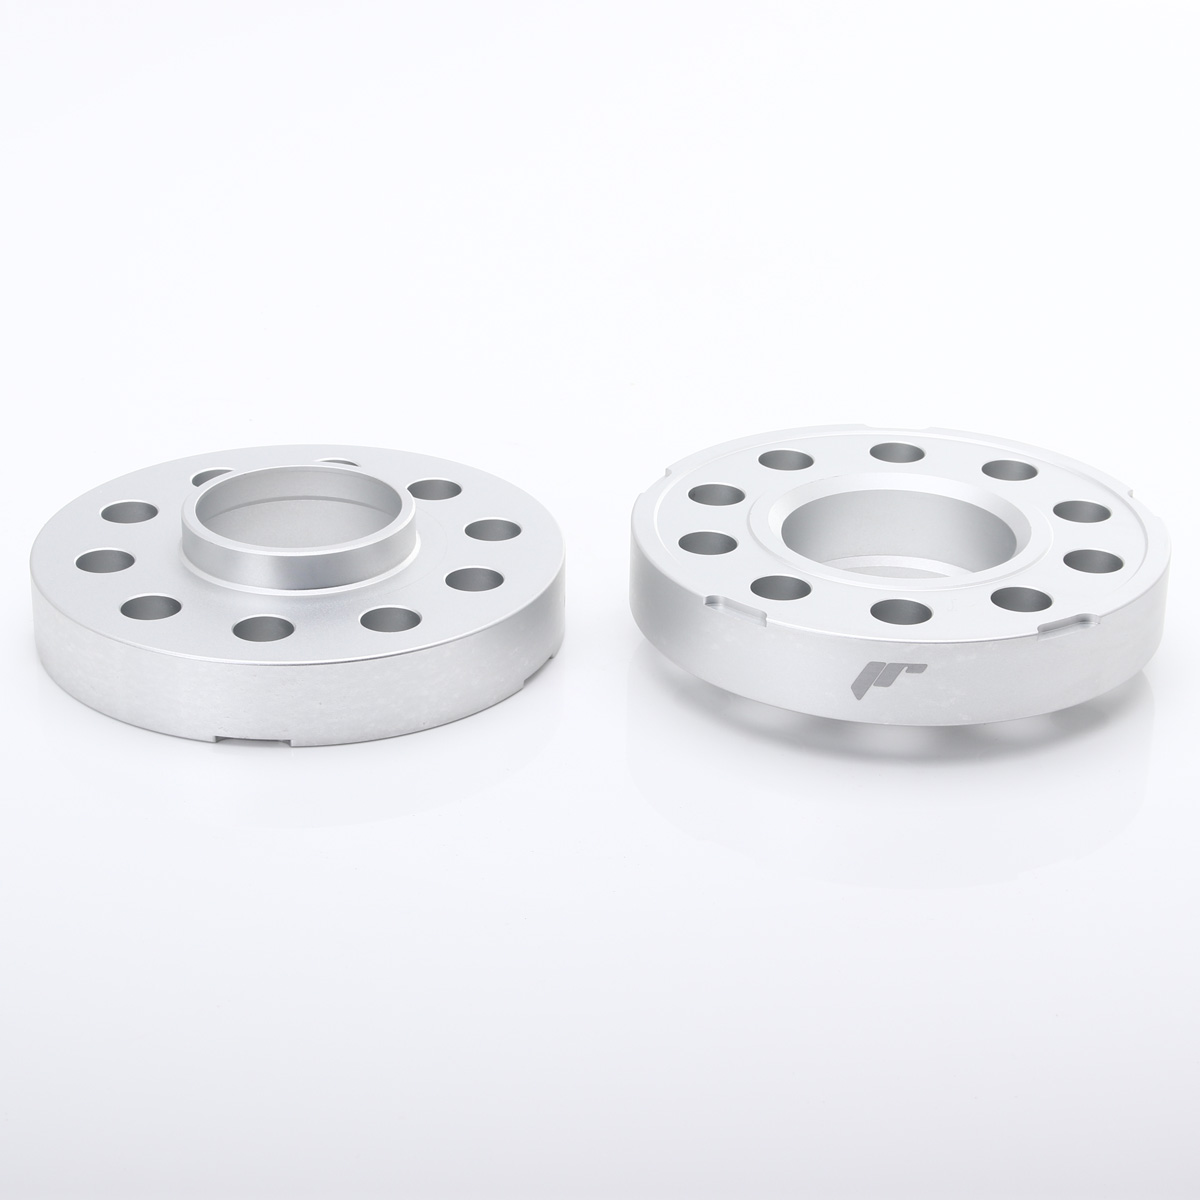 JRWS2 Spacers 10mm 5x120 72,6 72,6 Silver